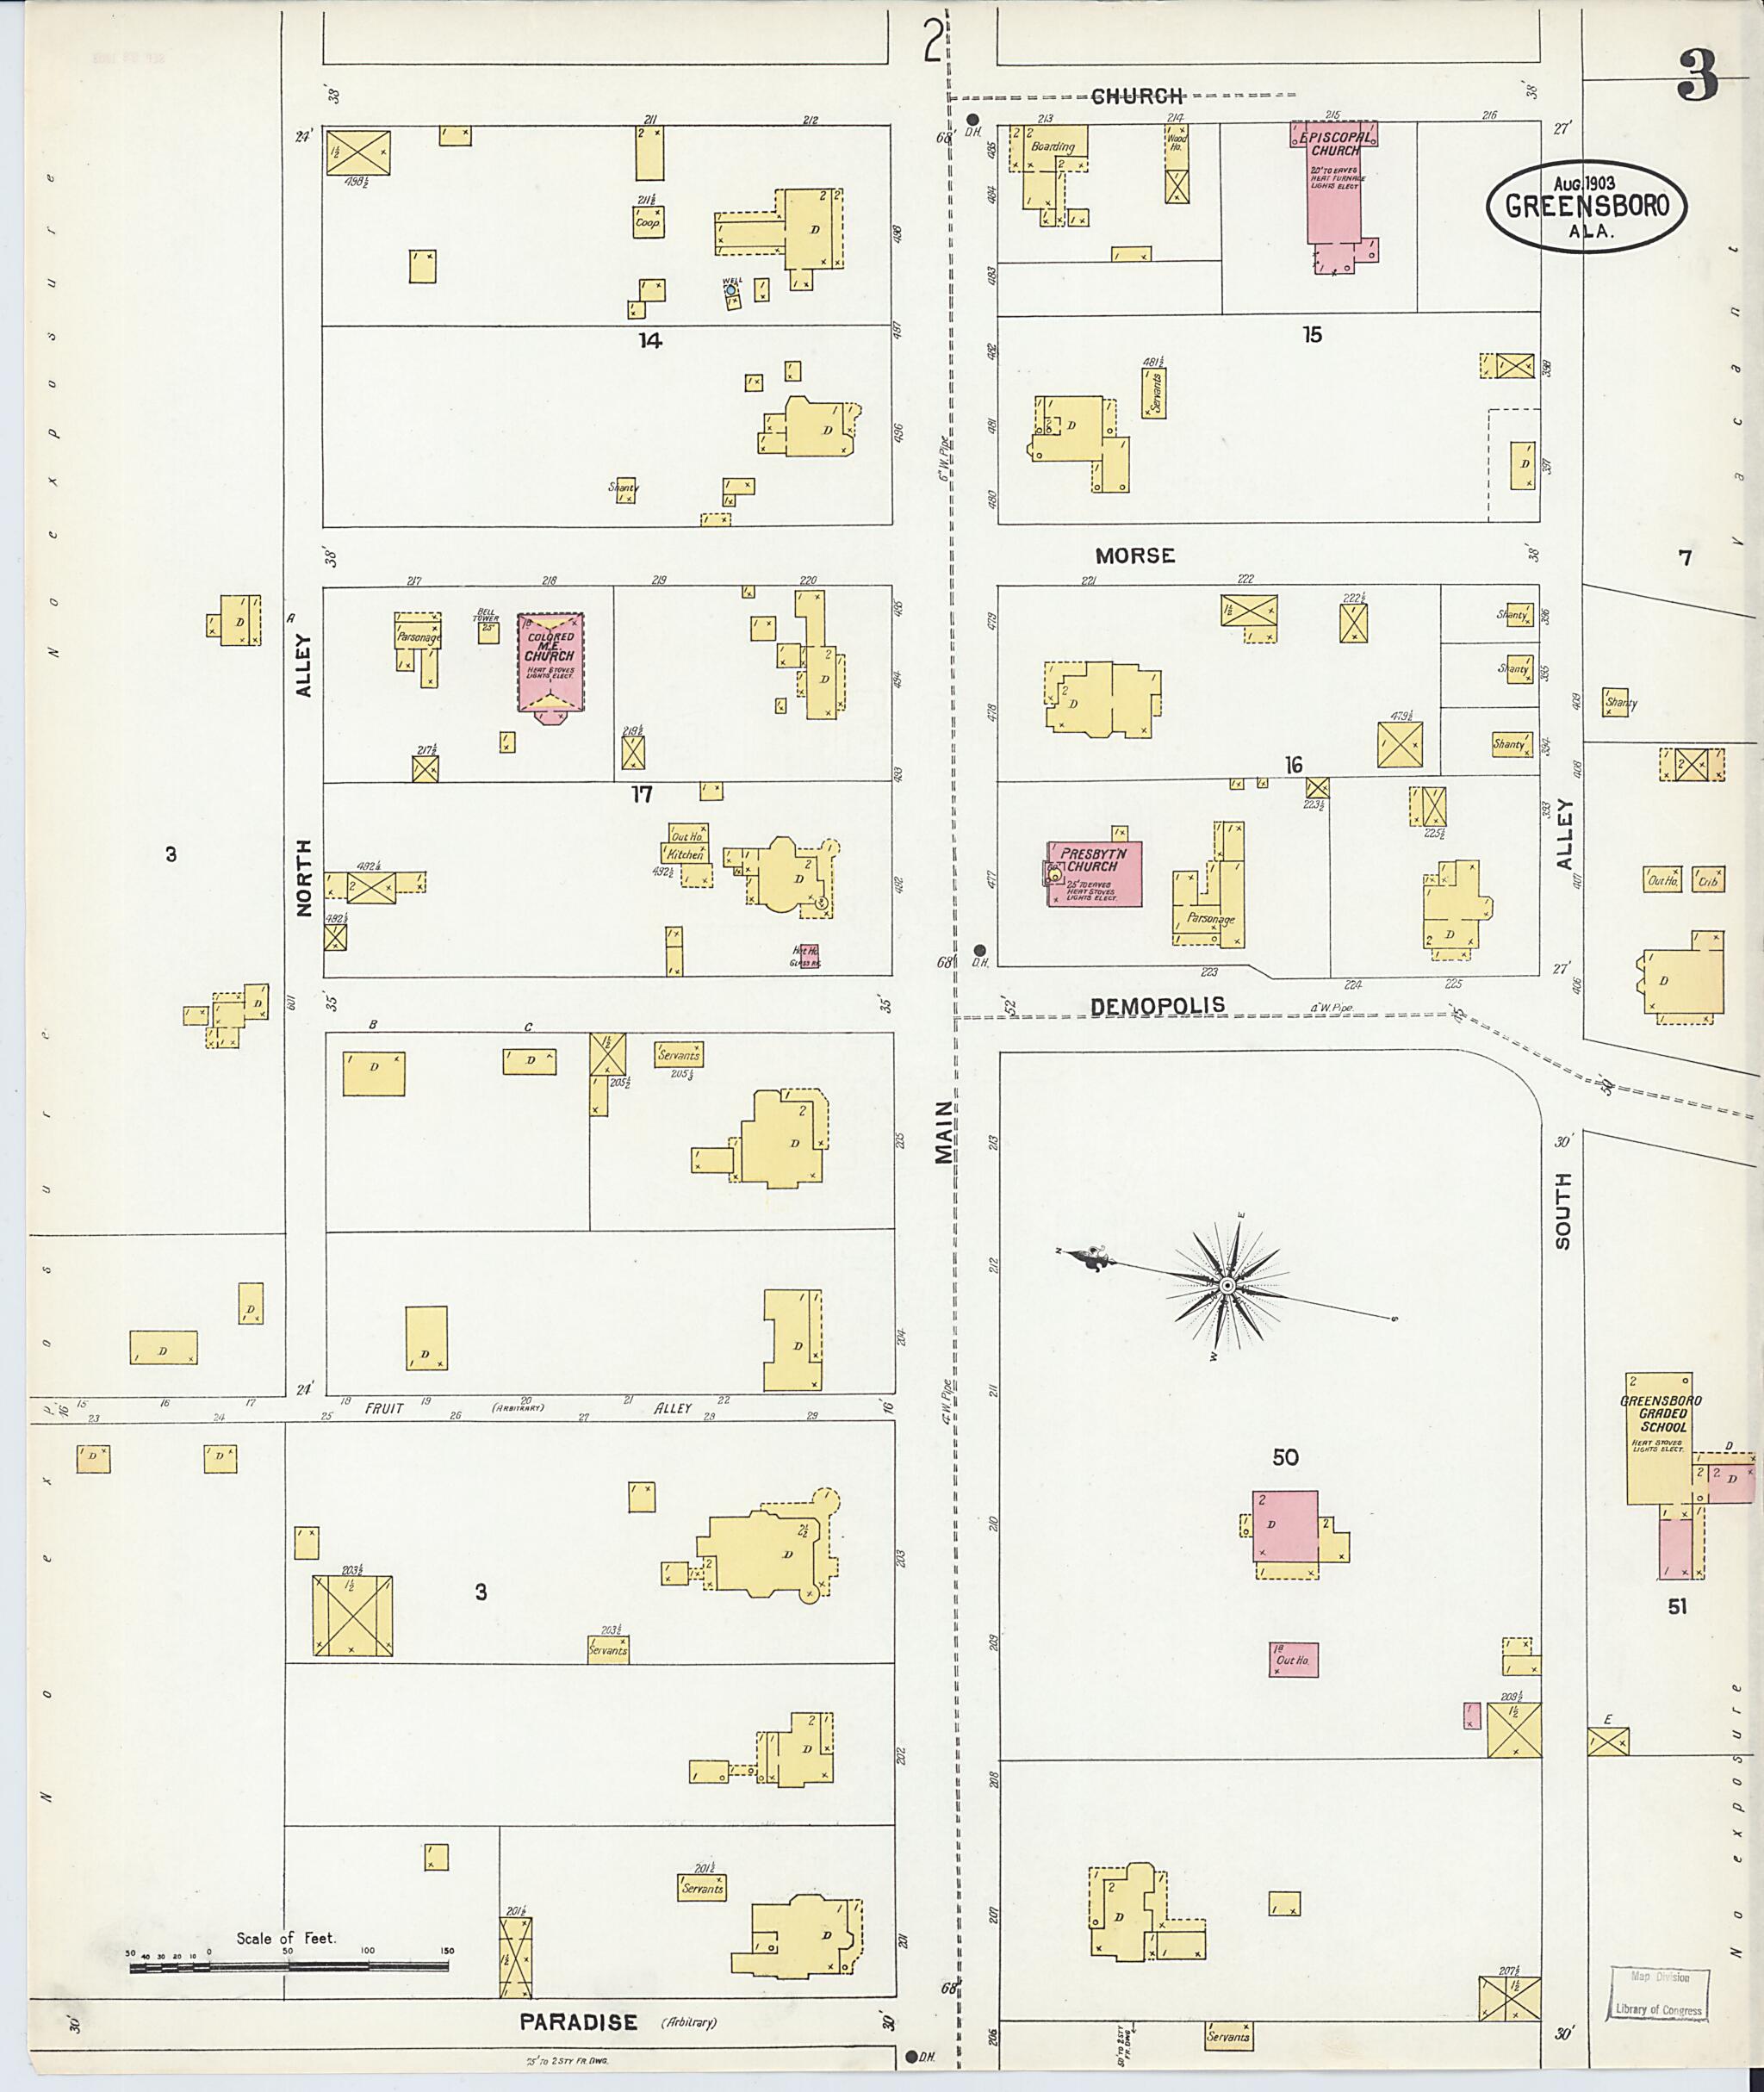 This old map of Greensboro, Hale County, Alabama was created by Sanborn Map Company in 1903